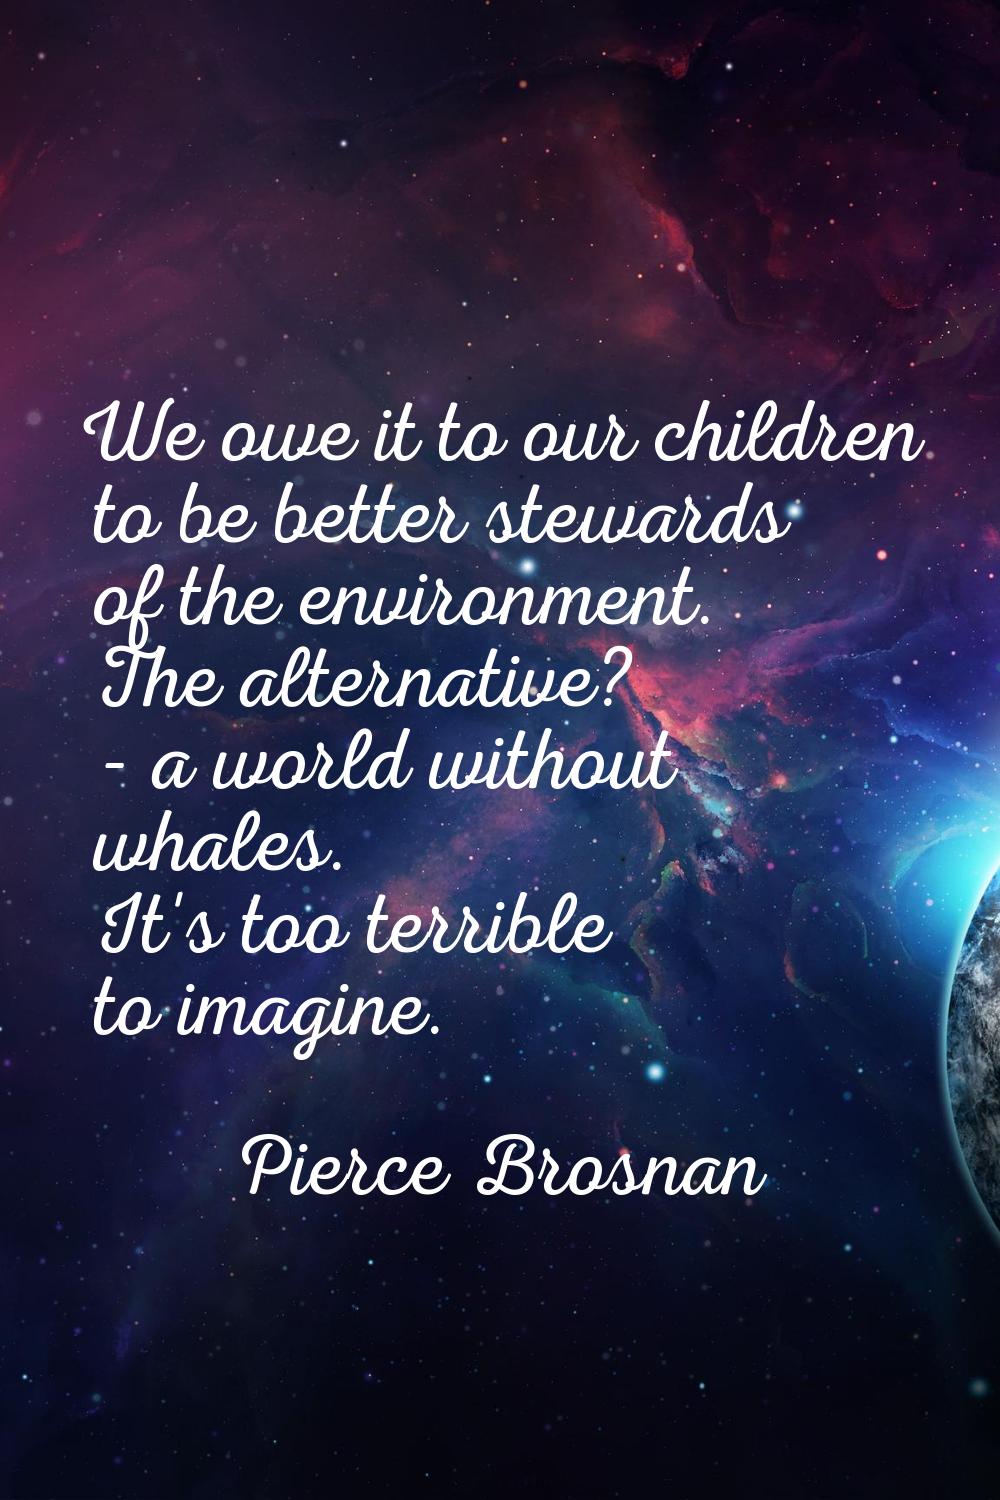 We owe it to our children to be better stewards of the environment. The alternative? - a world with